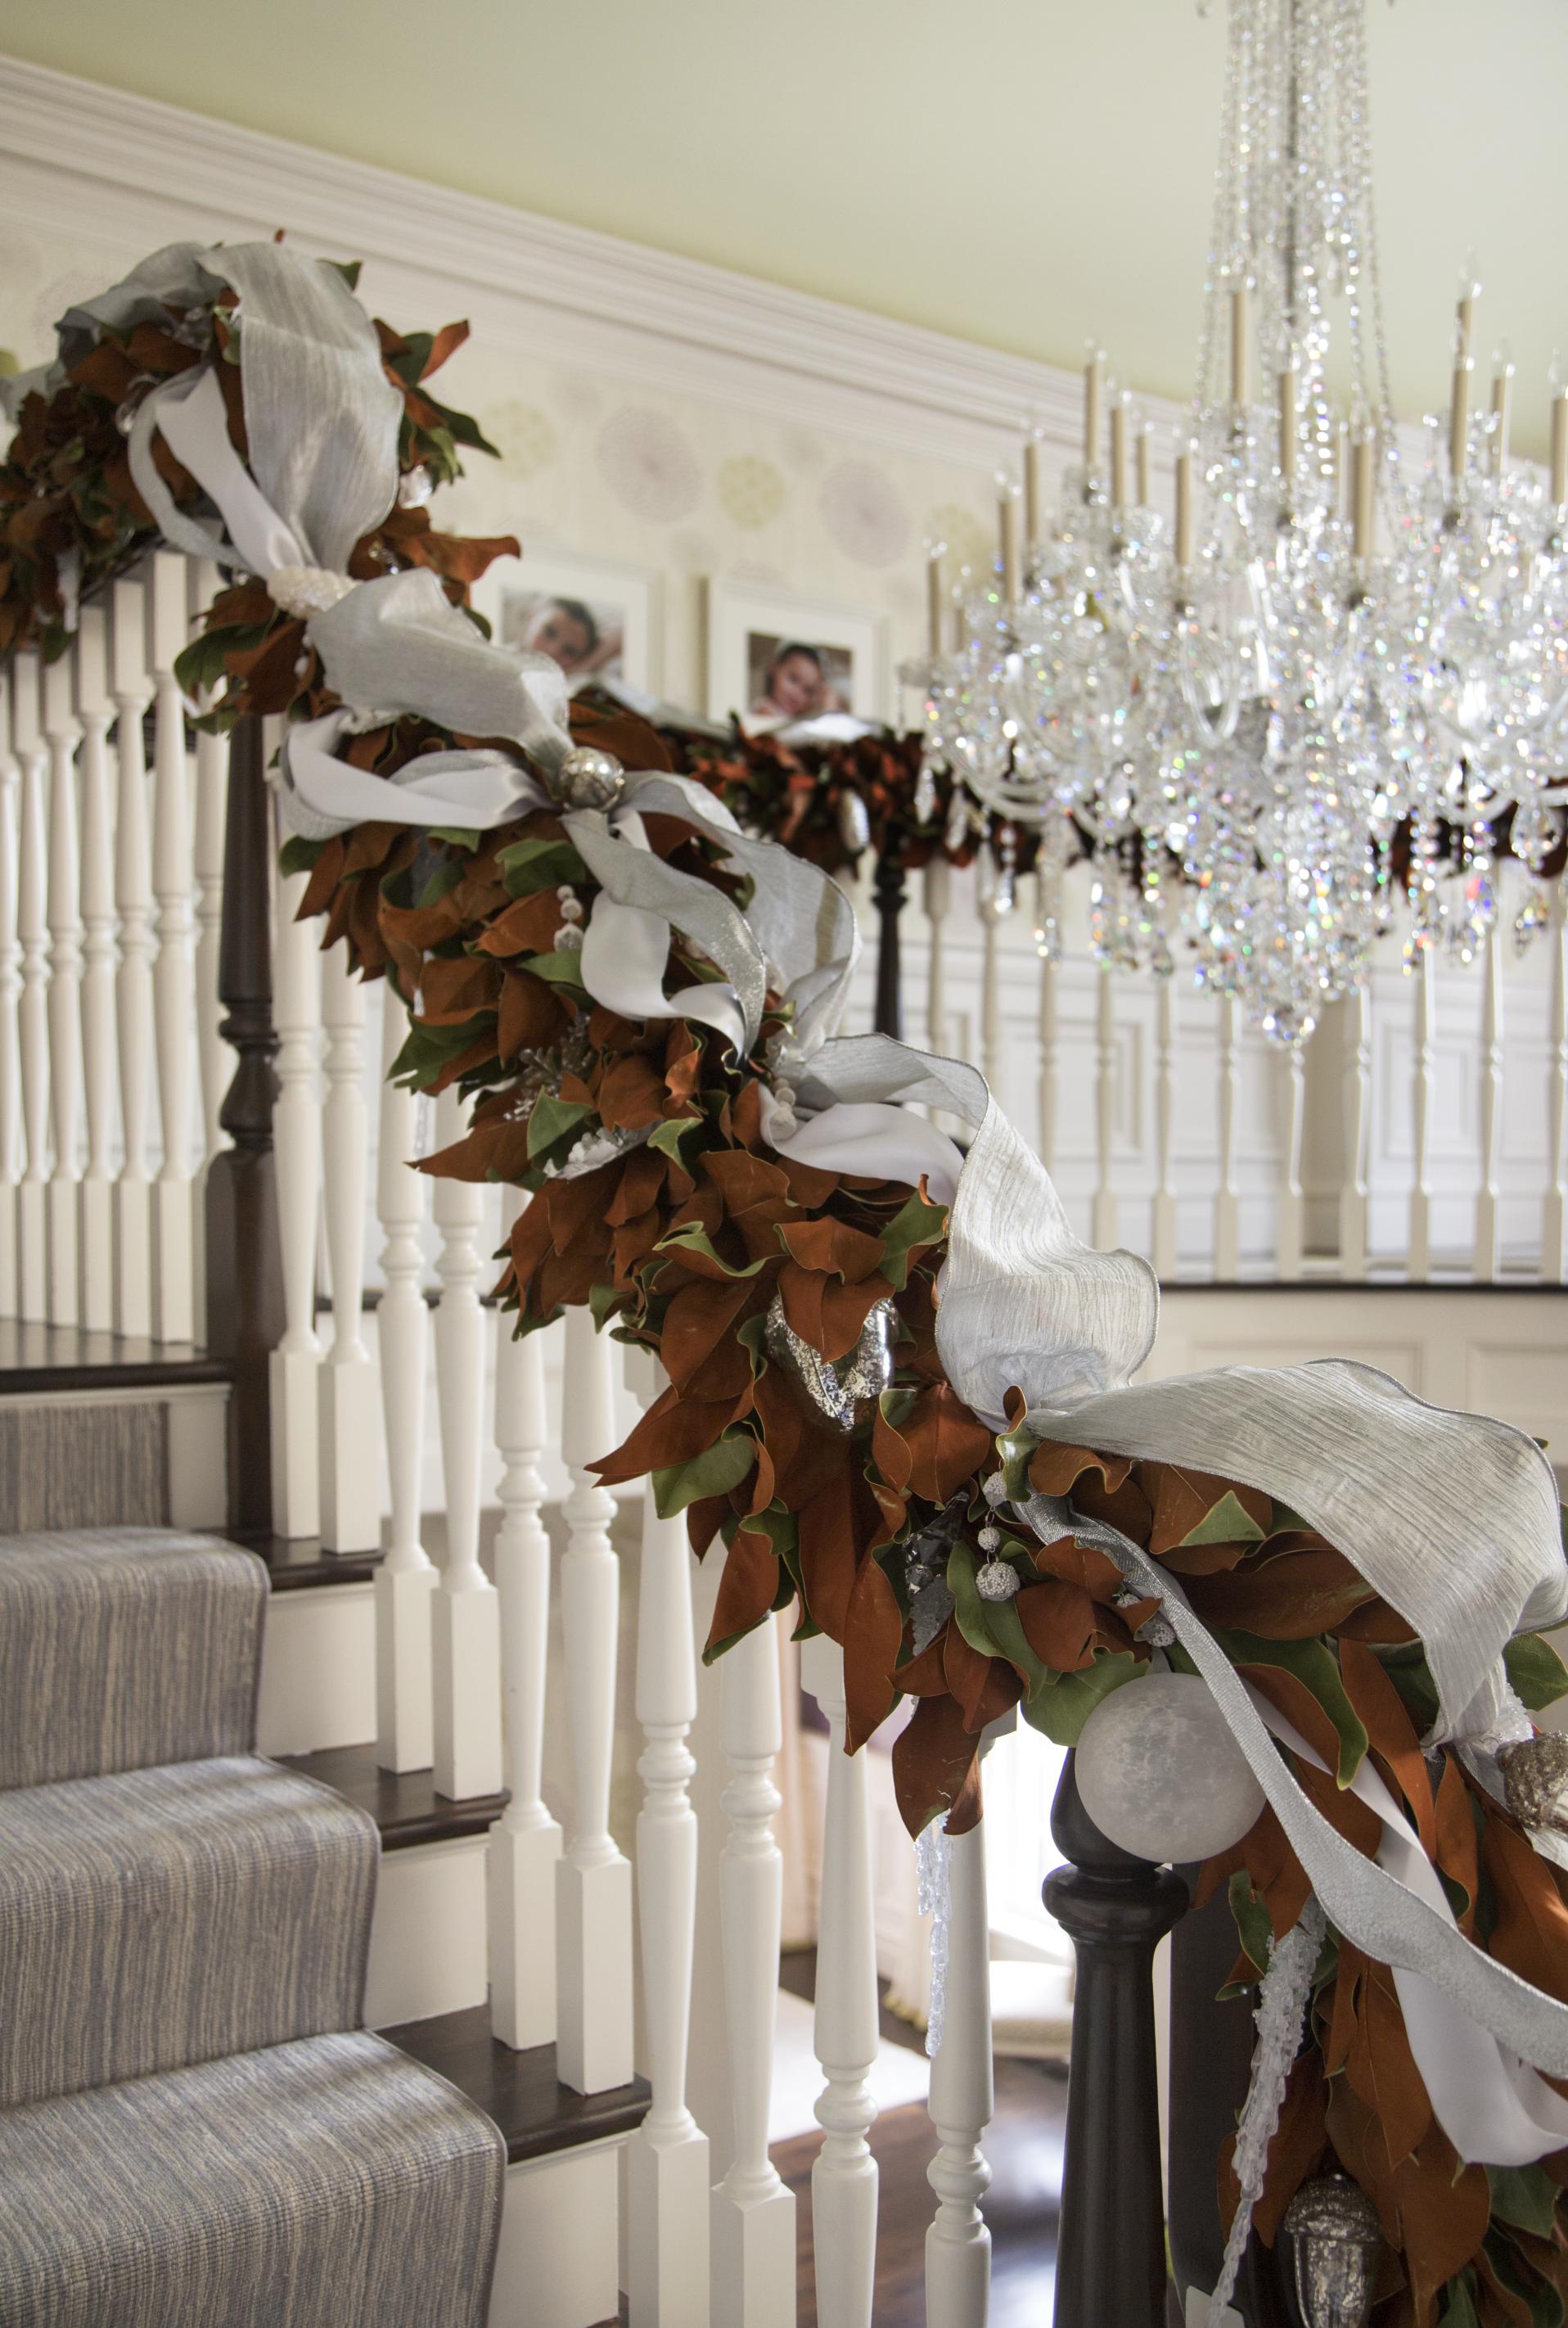 Festive Holiday Staircases and Entryways | Traditional Home